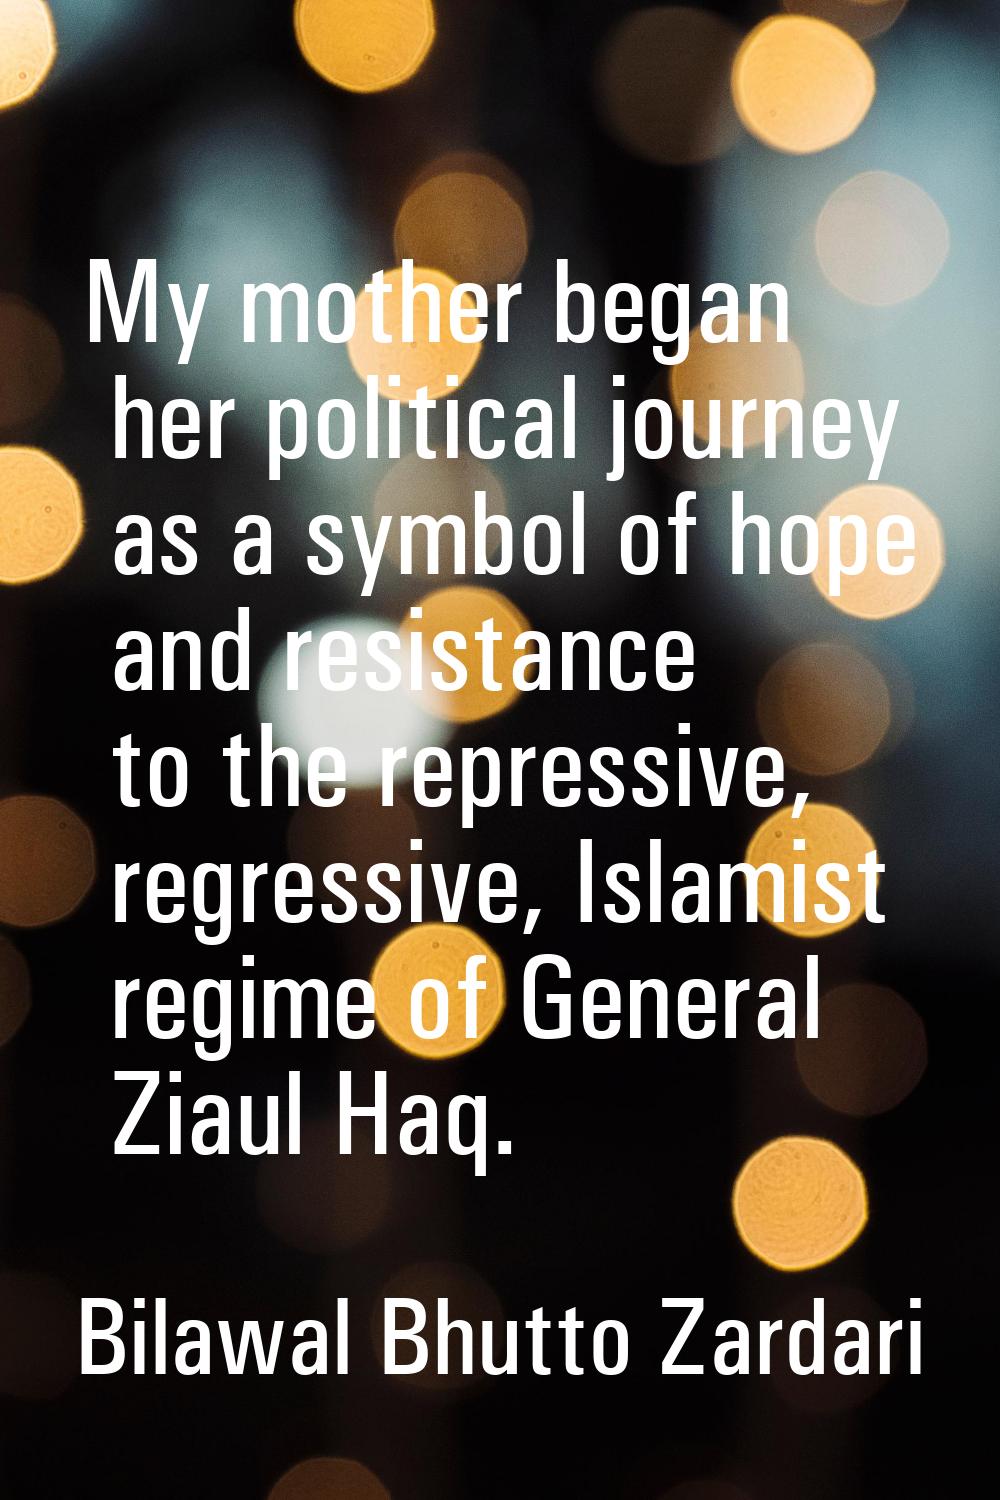 My mother began her political journey as a symbol of hope and resistance to the repressive, regress